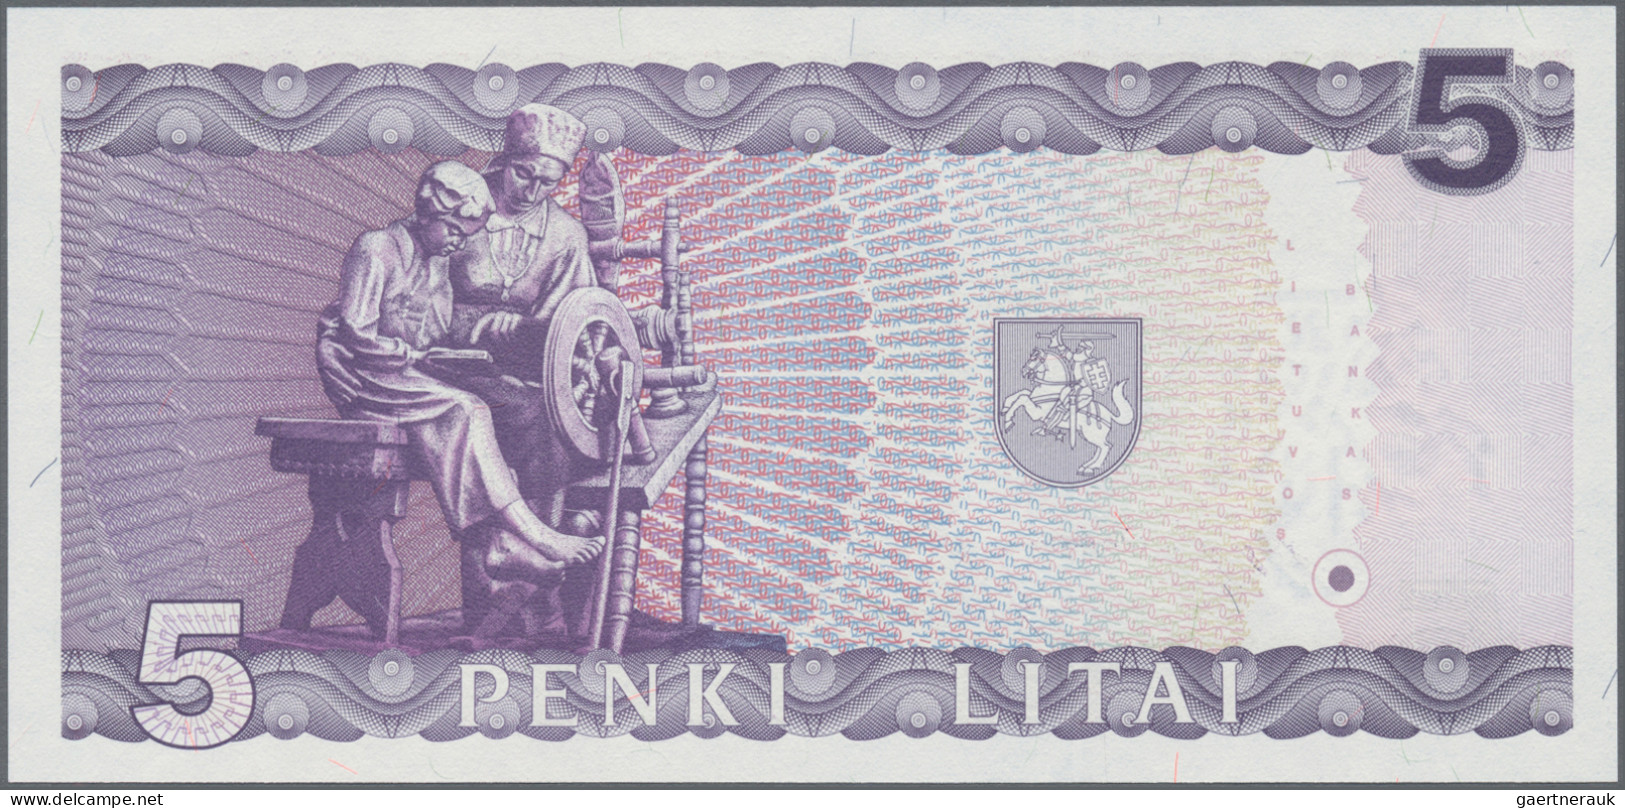 Lithuania: Lietuvos Bankas, set with 5 banknotes, series 1993-1997, with 1, 2, 5